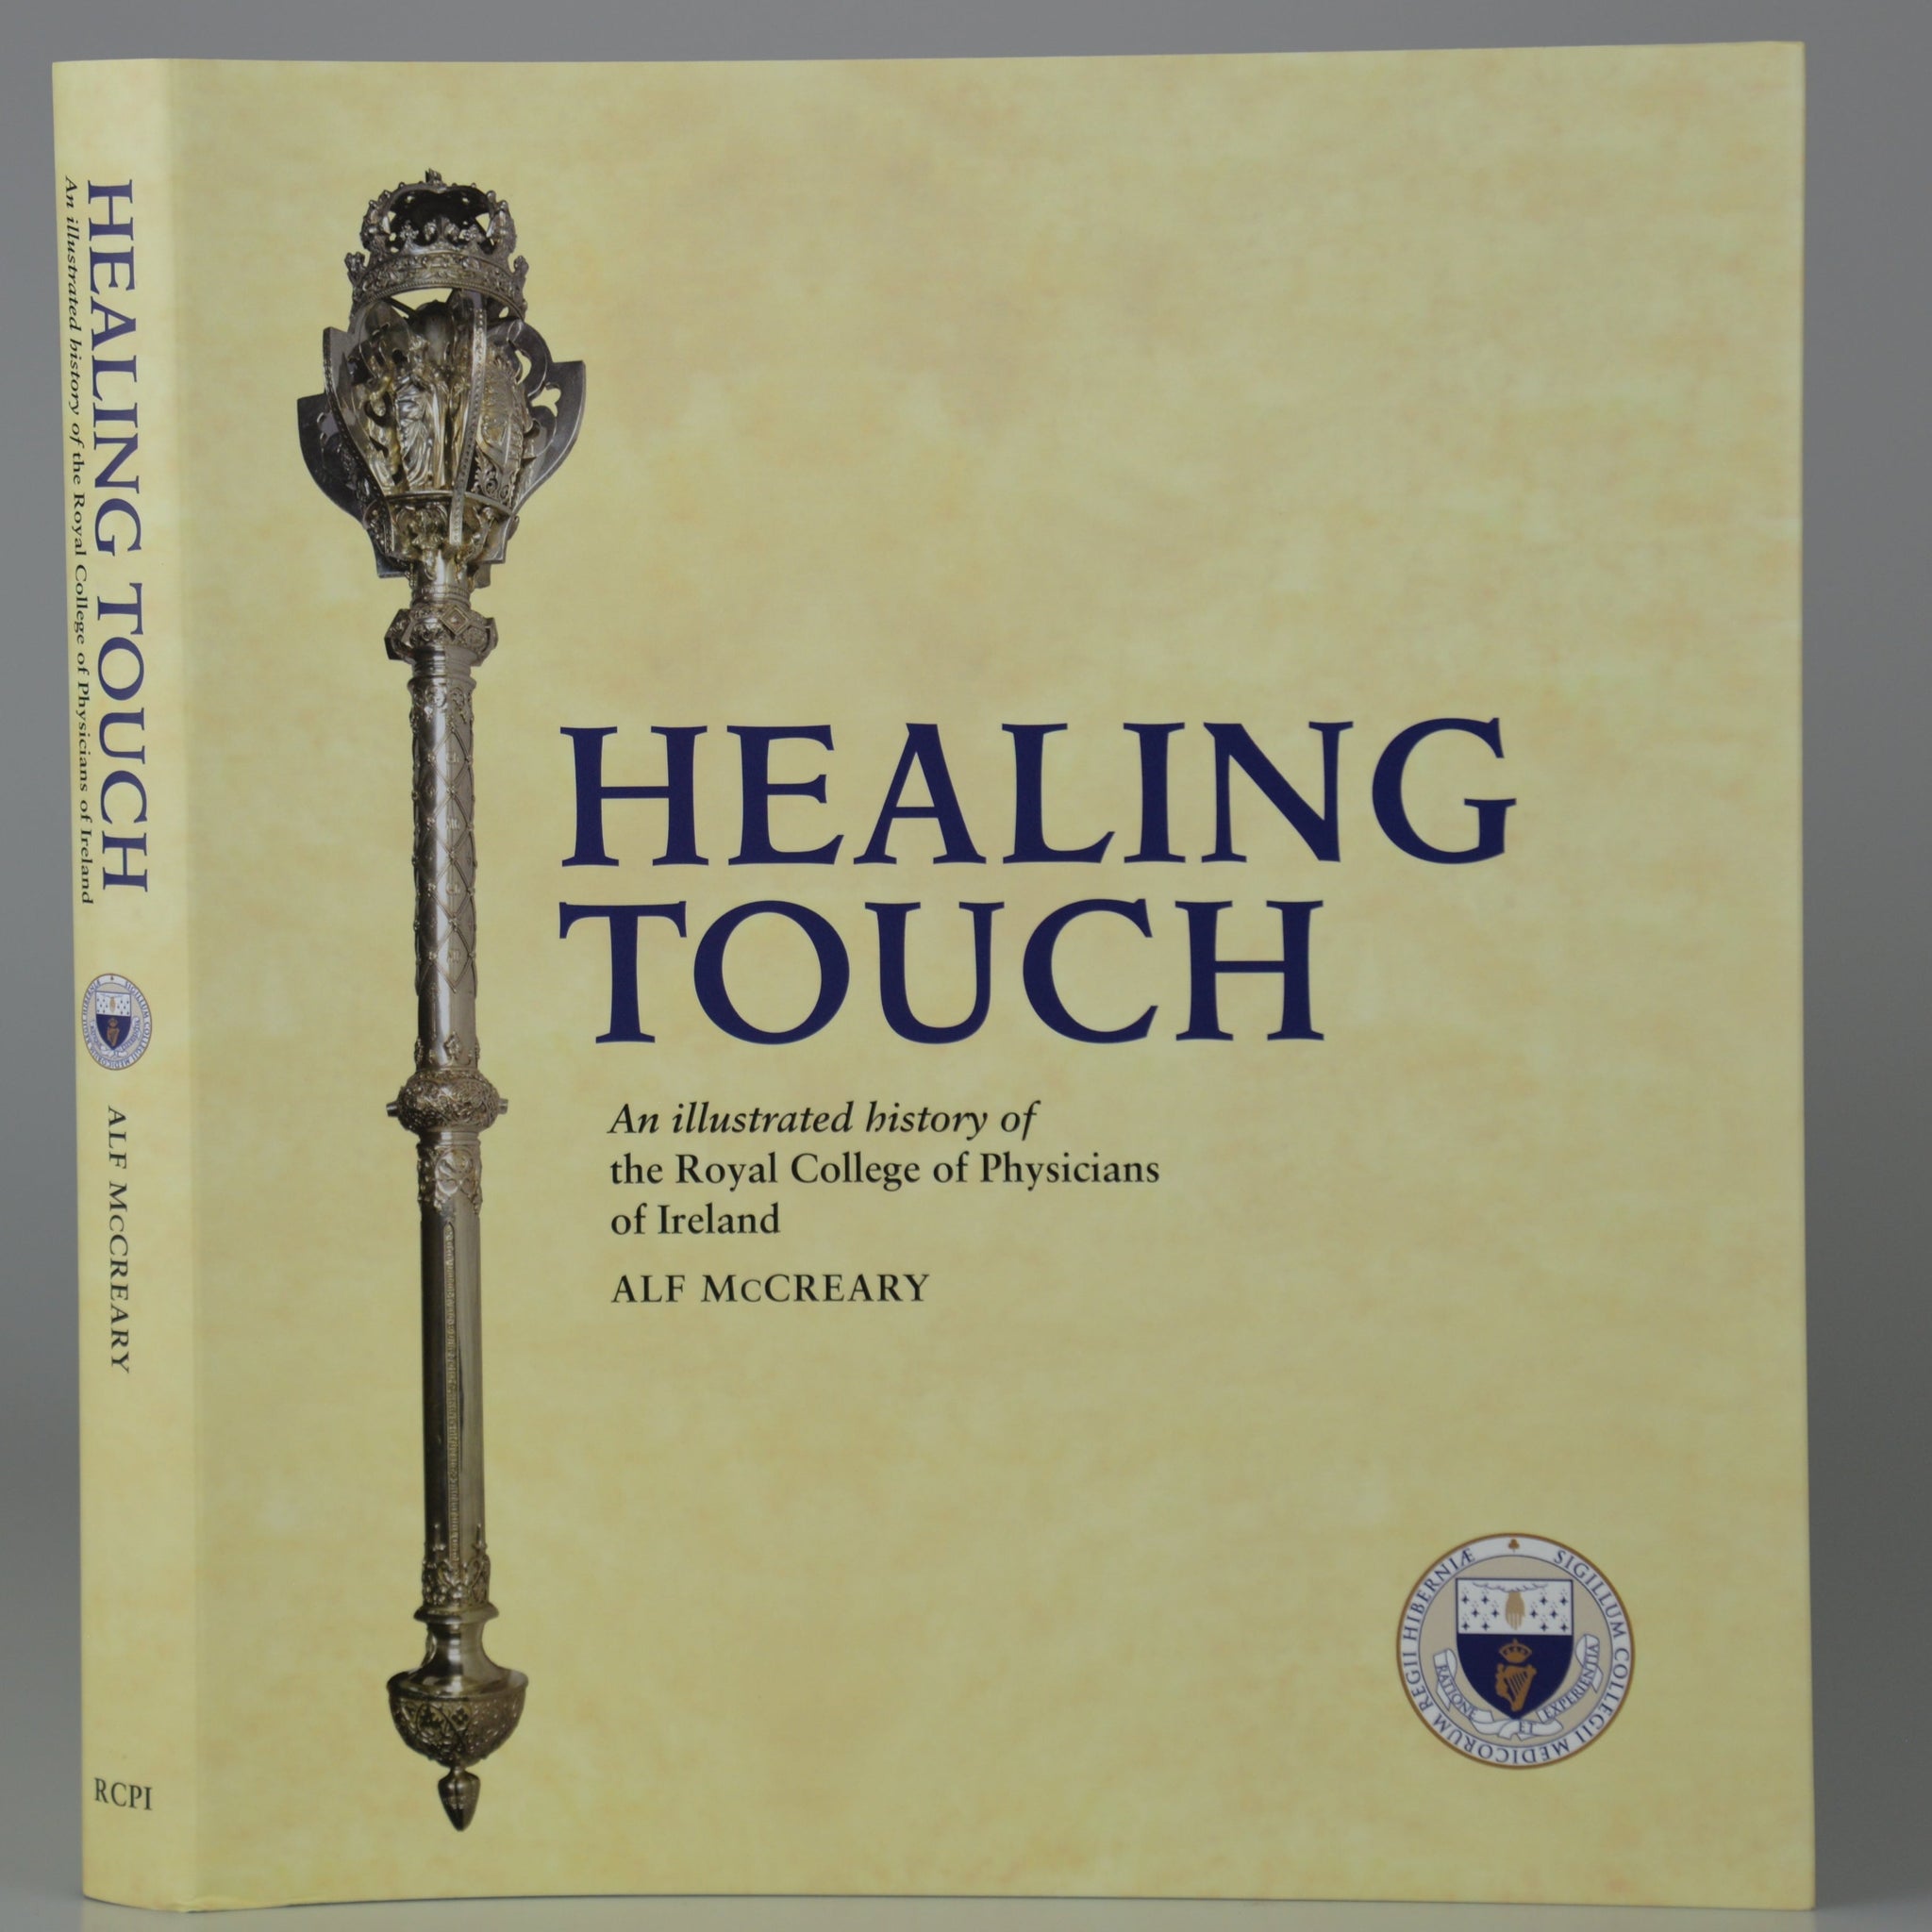 Healing Touch – an illustrated history of the Royal College of Physicians of Ireland by Alf McCreary